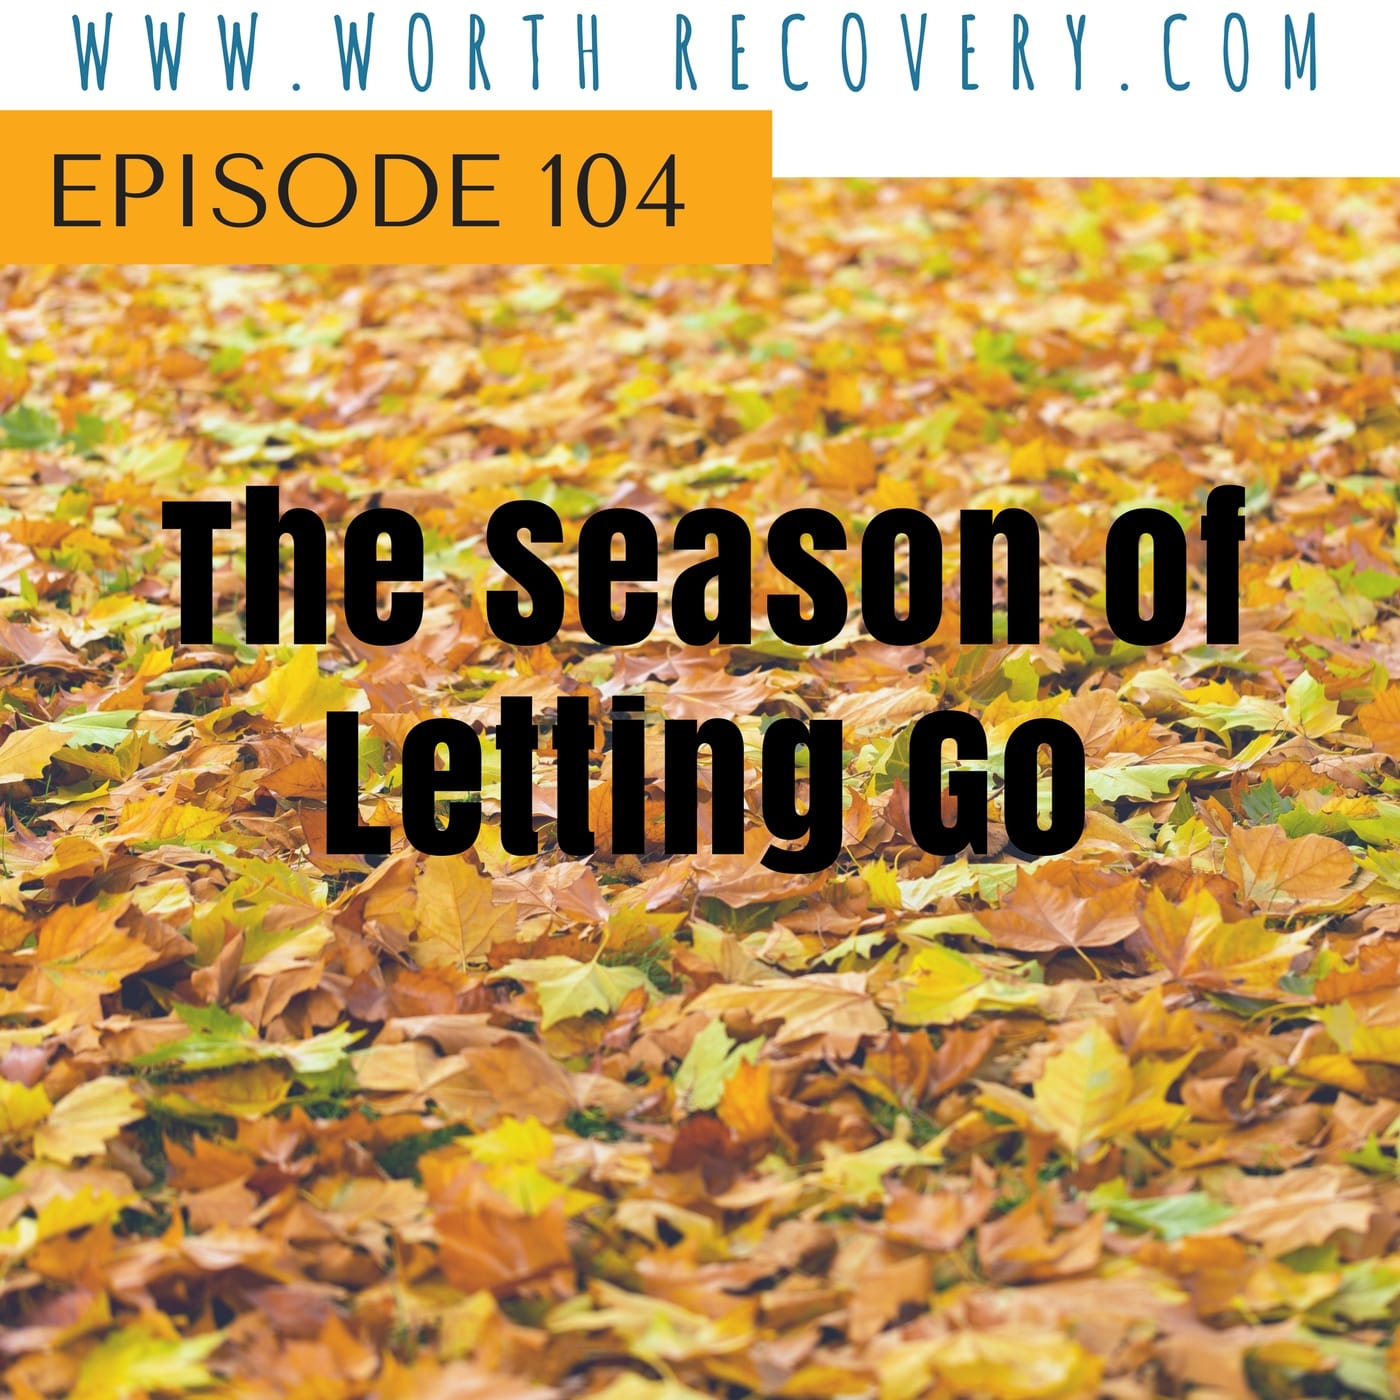 Episode 104: The Season of Letting Go